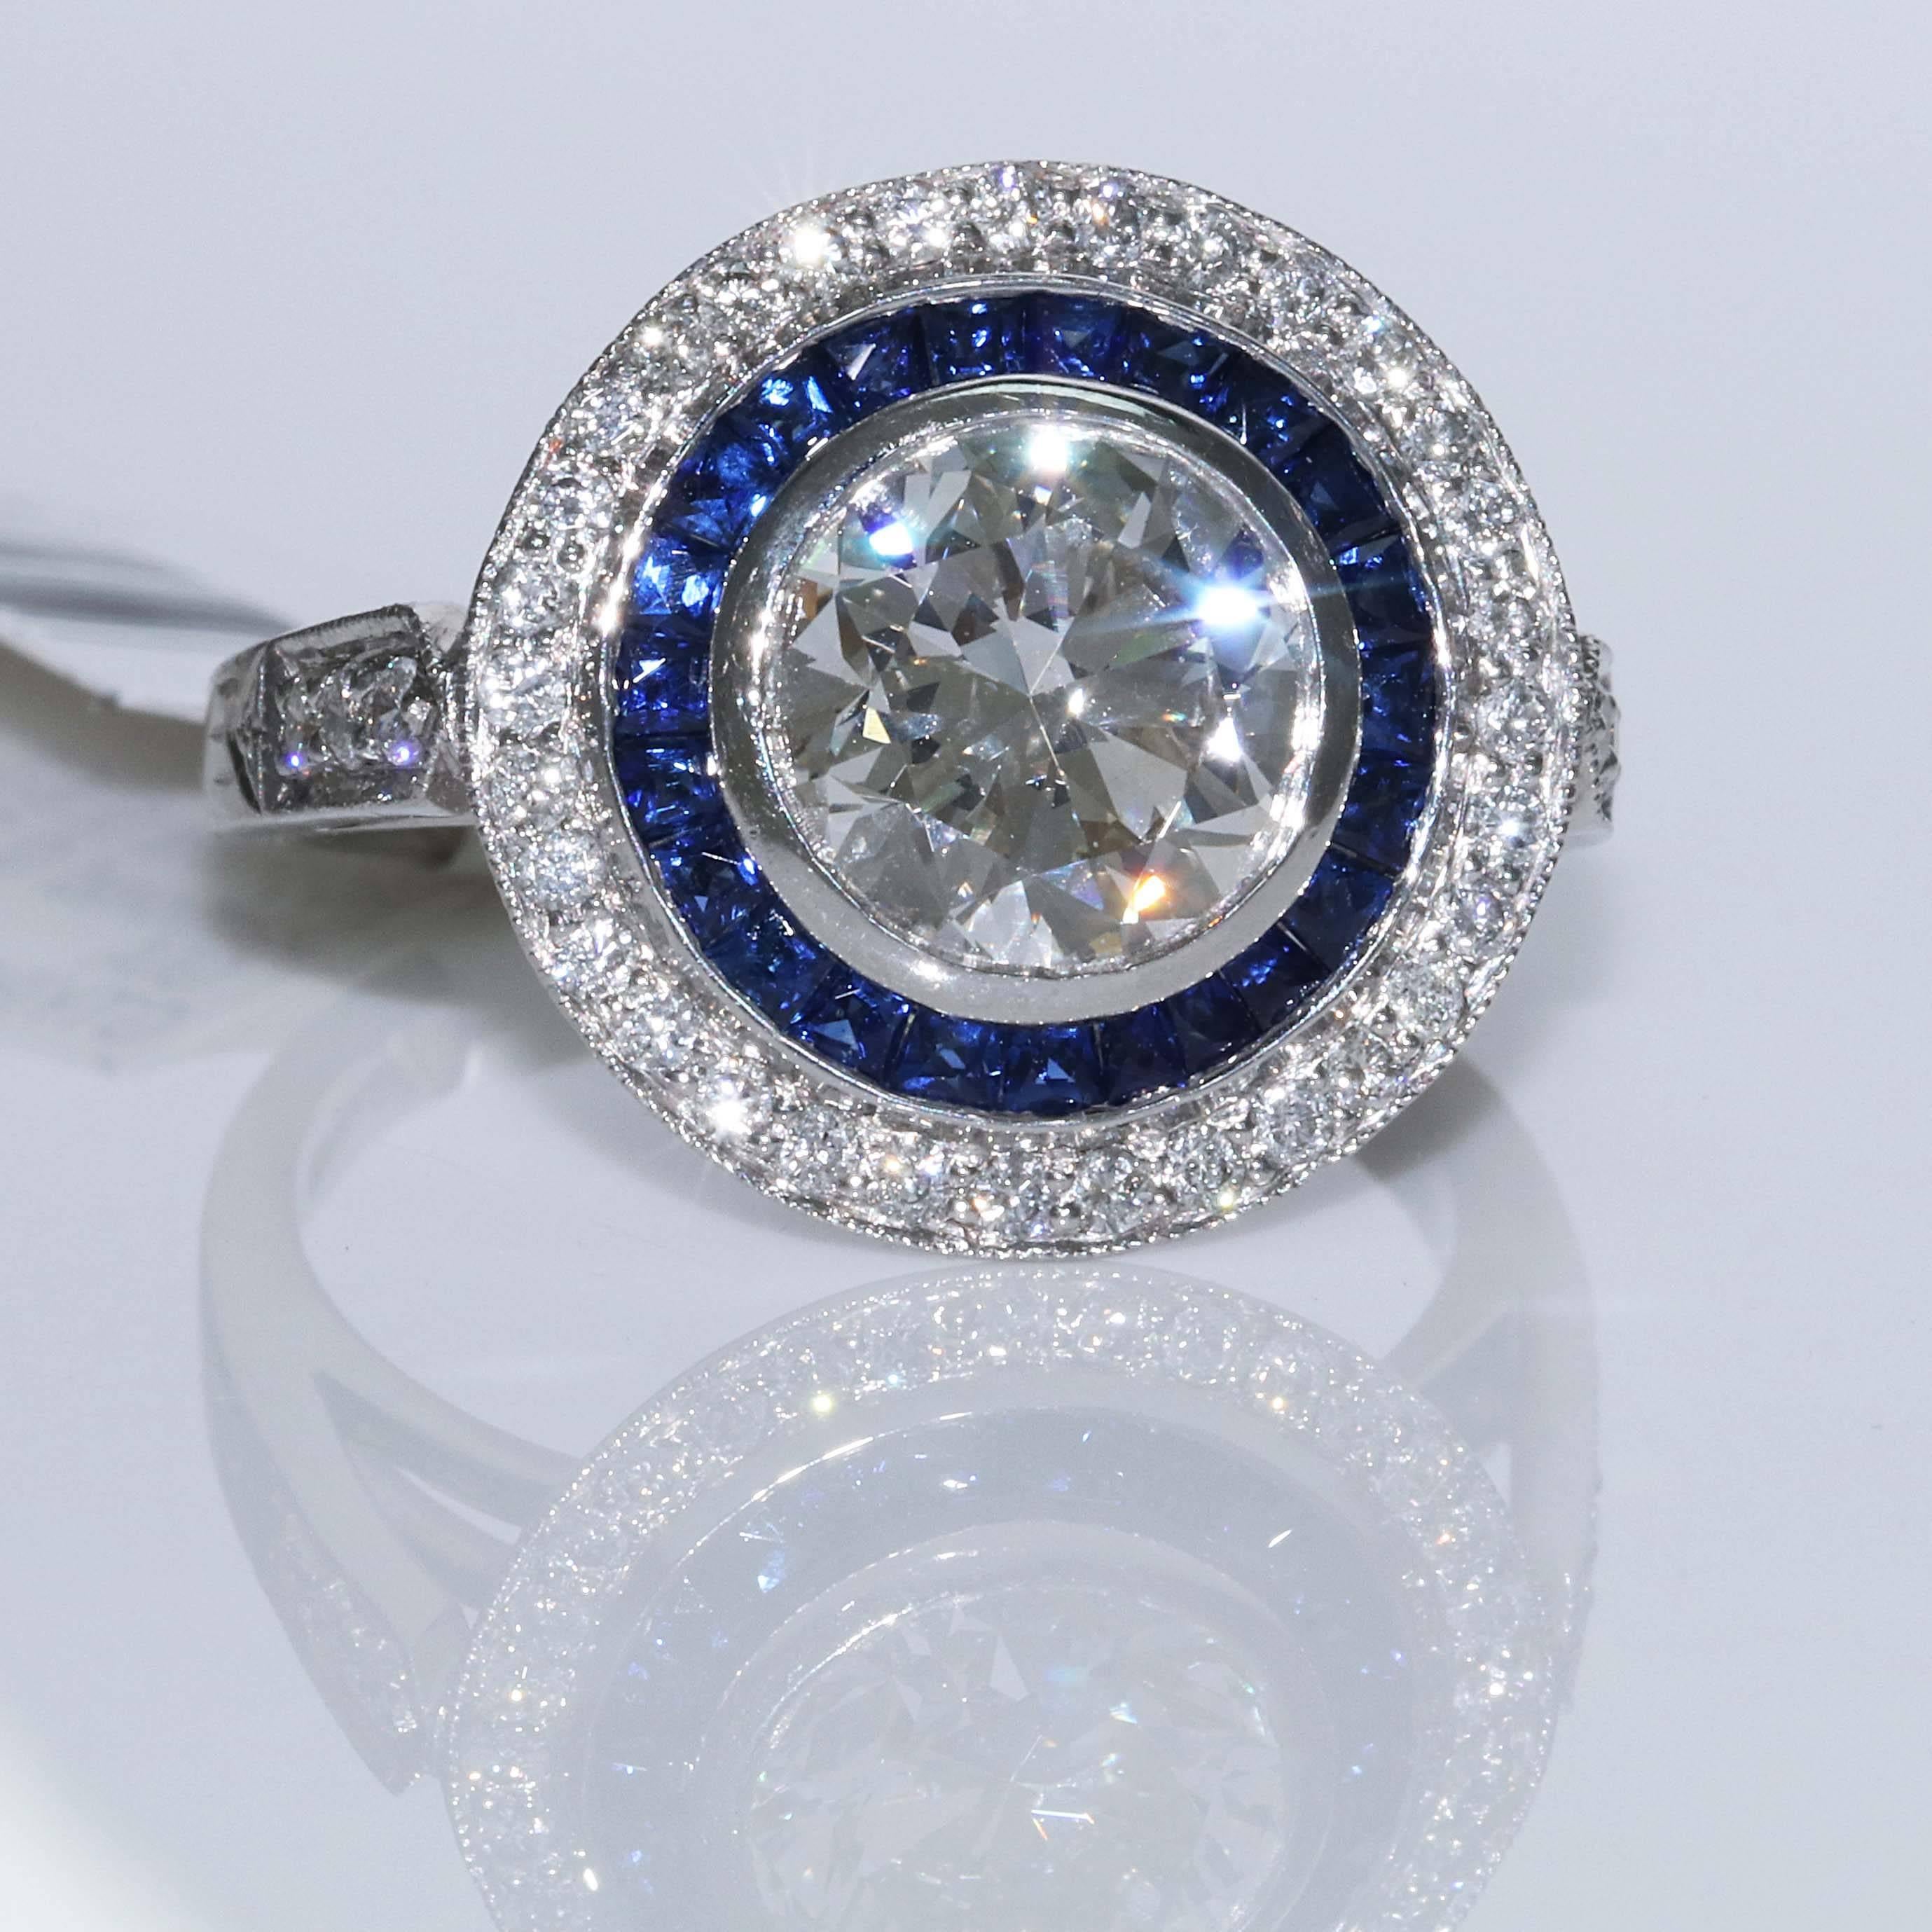 What a perfect engagement ring or fashion ring. This ring plays both parts. In the center is an exquisite GIA Certified 2.18 carat i-Si1 round brilliant diamond. Around the center diamond is .63 carats of blue sapphires. These sapphires all match in